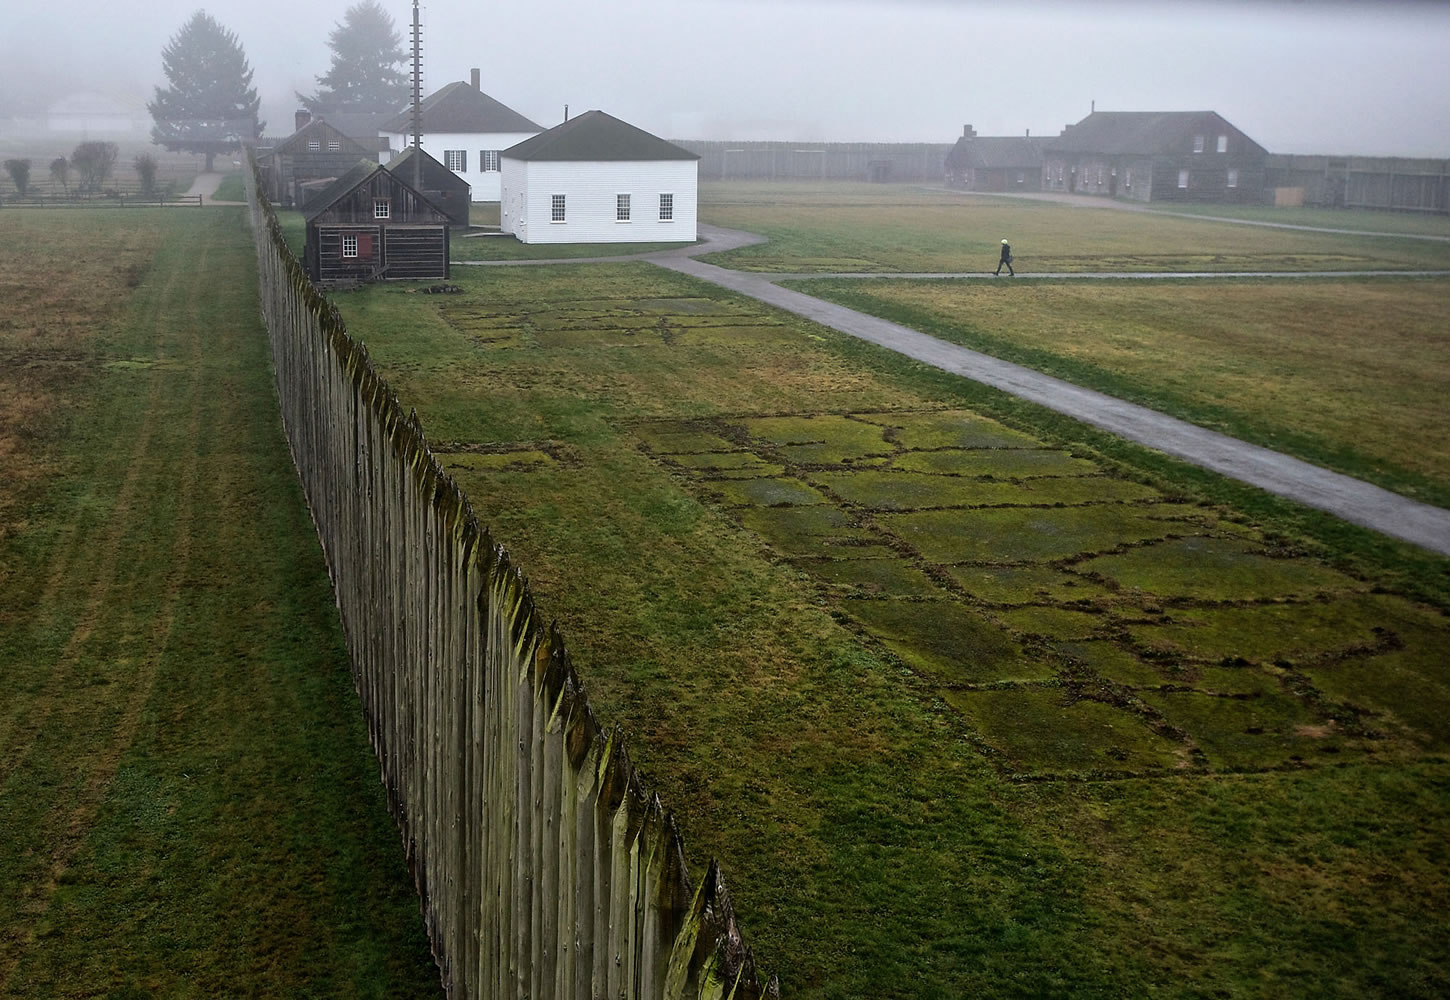 A visitor walking through Fort Vancouver National Historic Site is observed from an upper story of the bastion at the northwest corner of the reconstructed stockade.